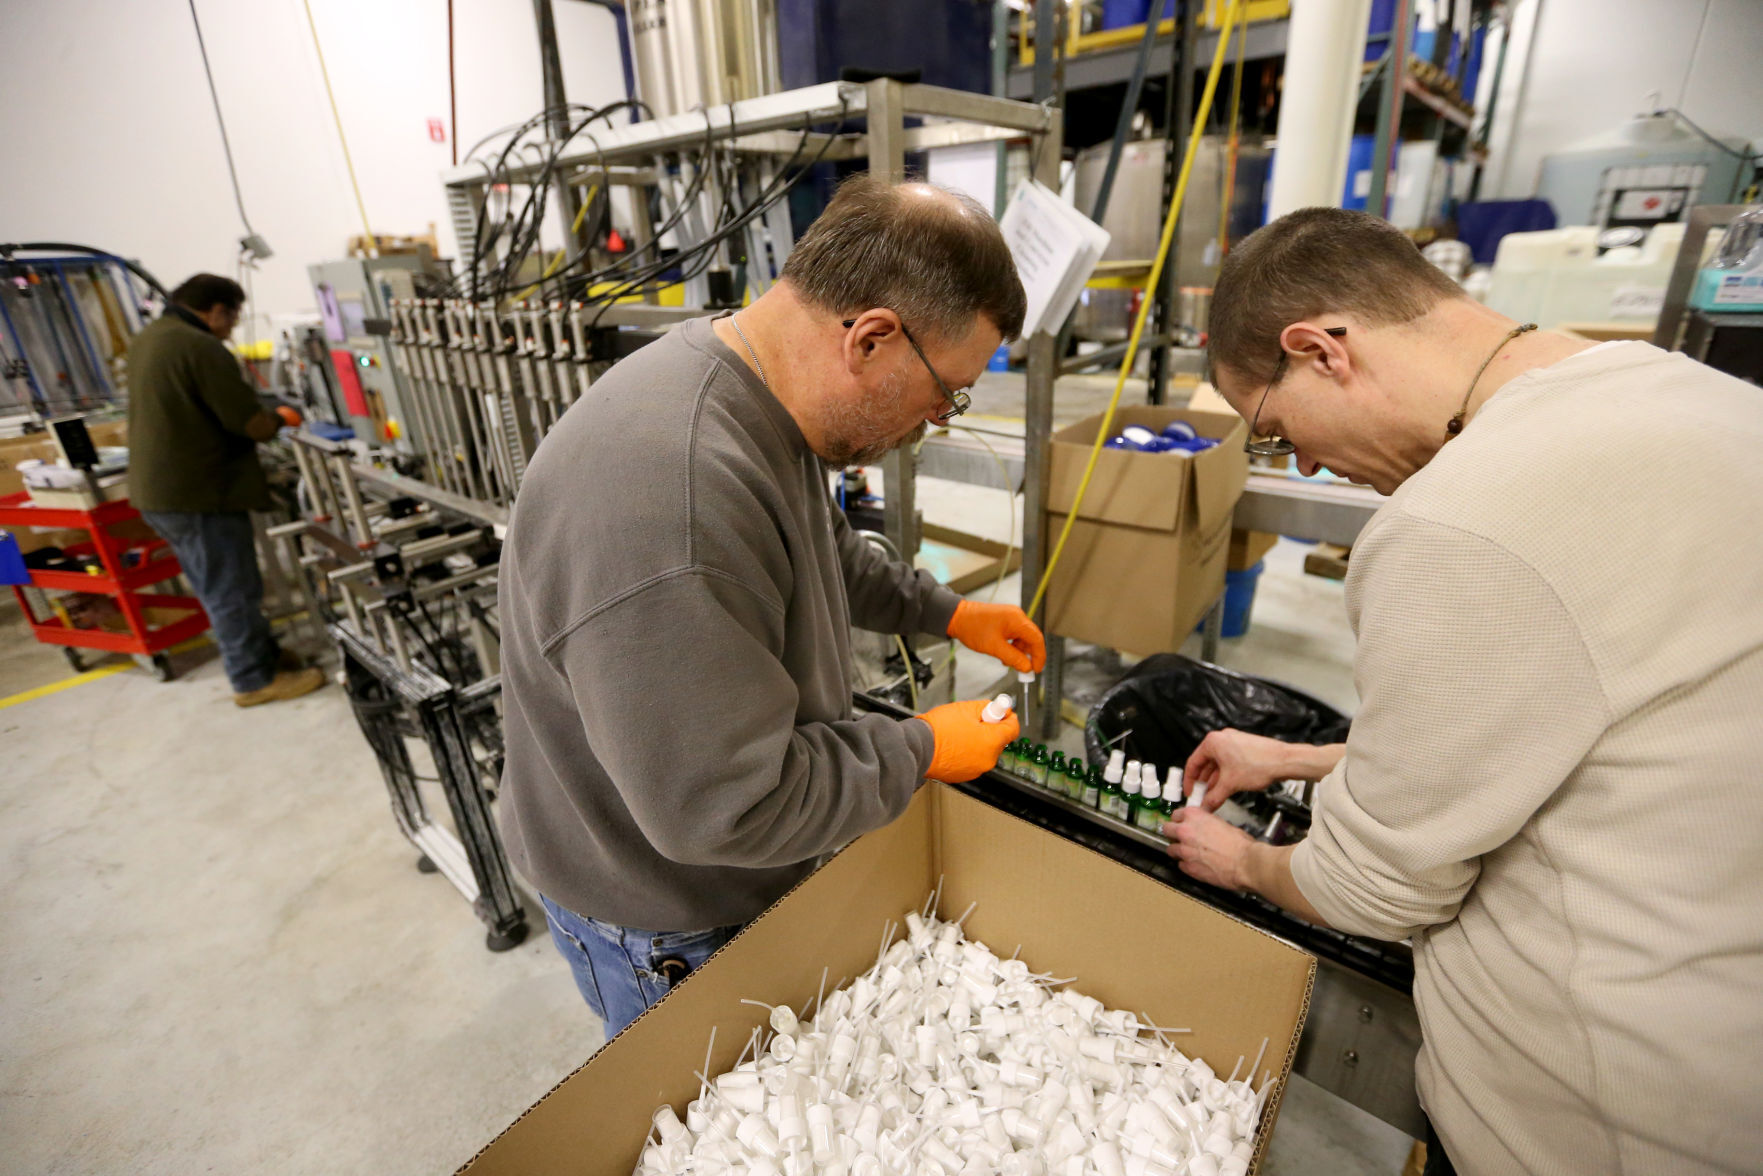 Gene Fangman (left) and Jeremy Crubaugh put caps on bottles at Higley Industries.    PHOTO CREDIT: JESSICA REILLY